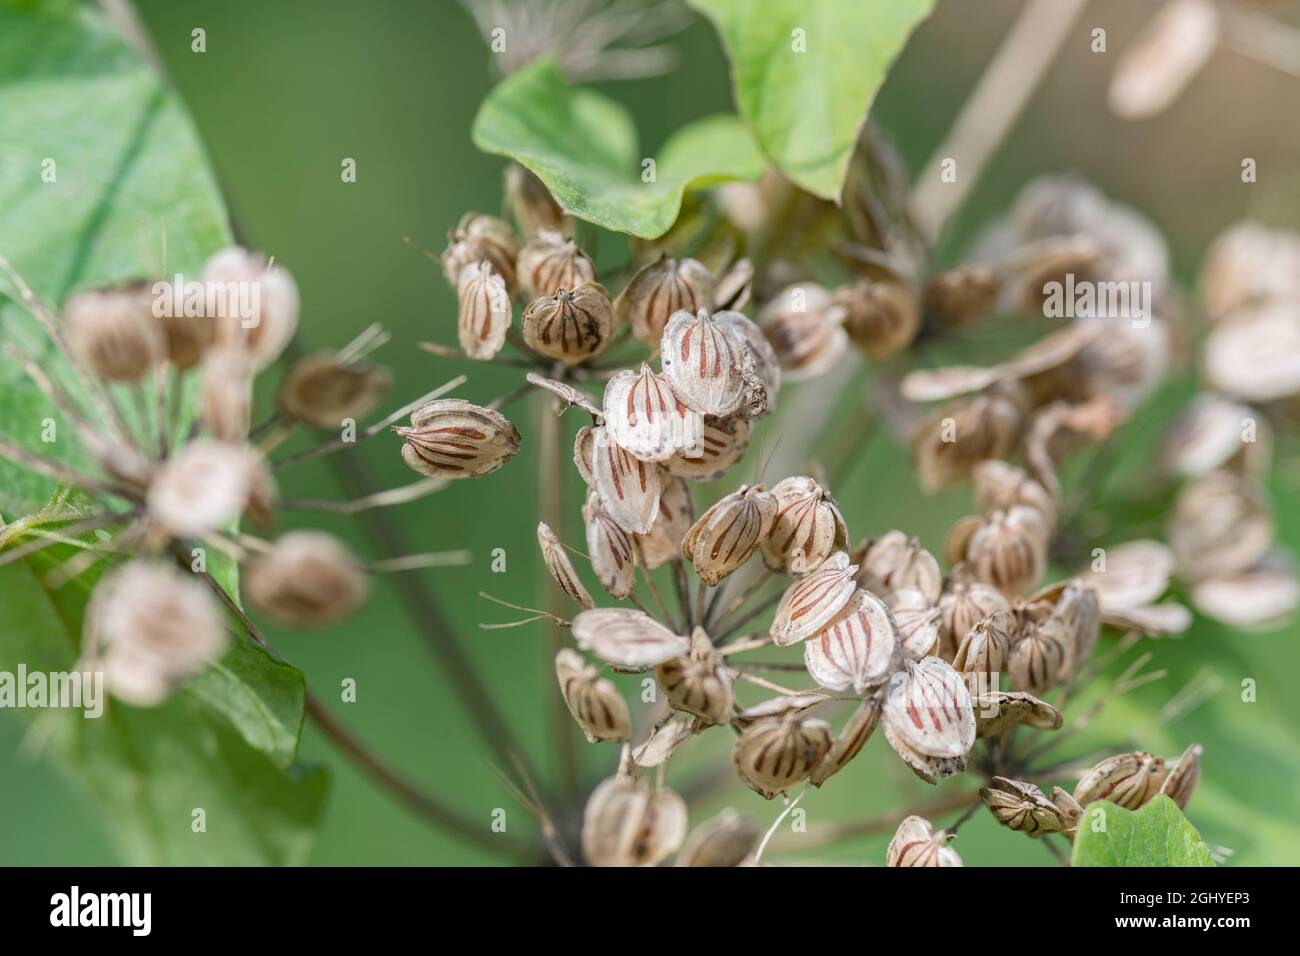 Close-up of mature ripe seeds of Hogweed / Heracleum sphondylium showing streaked vittae. Cow parsley family. Common weed in the UK. Stock Photo